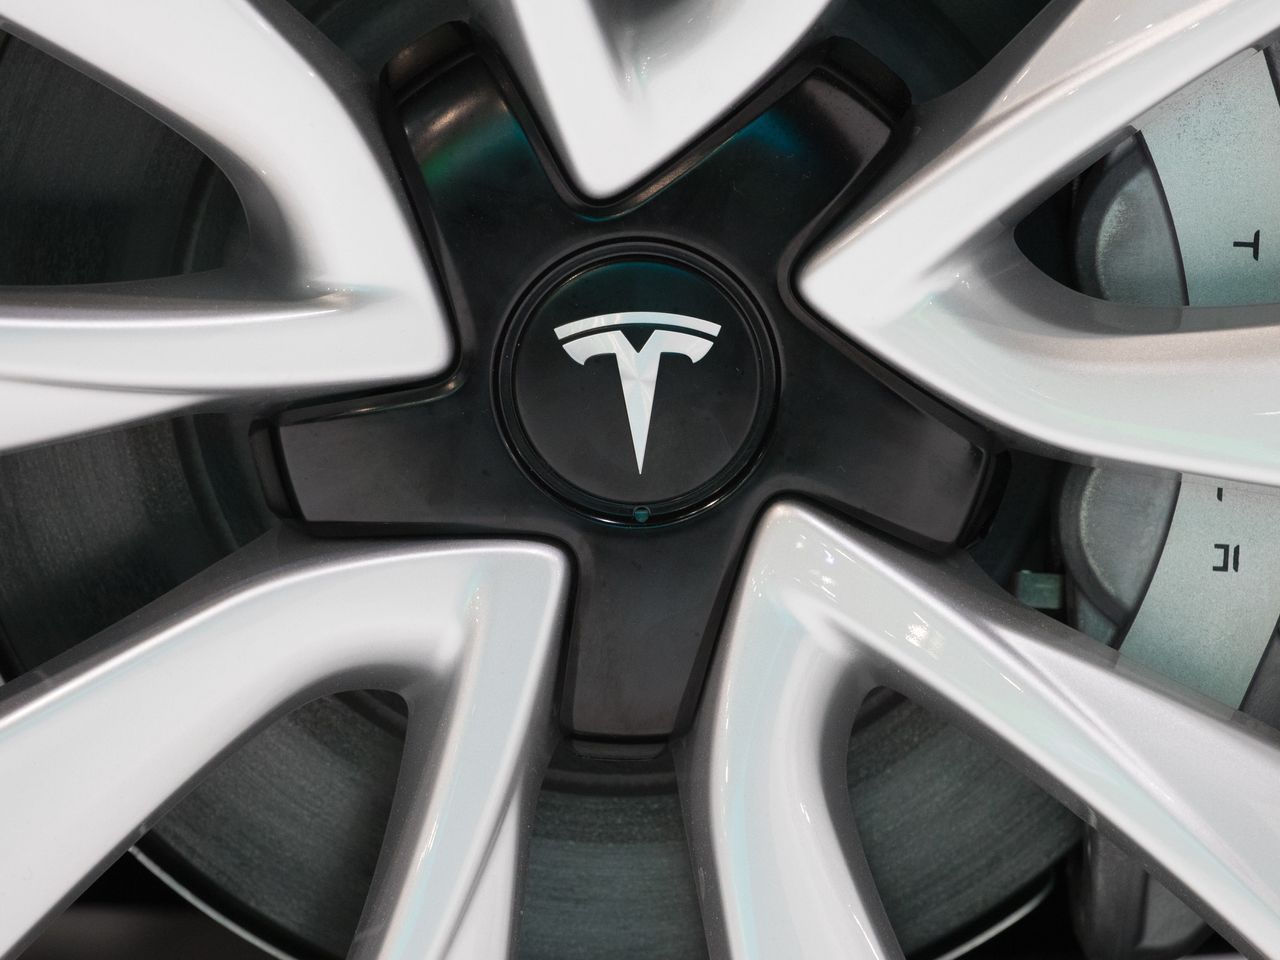 Indian Investors Are Piling into Tesla TSLA Stock Before Products Have Launched